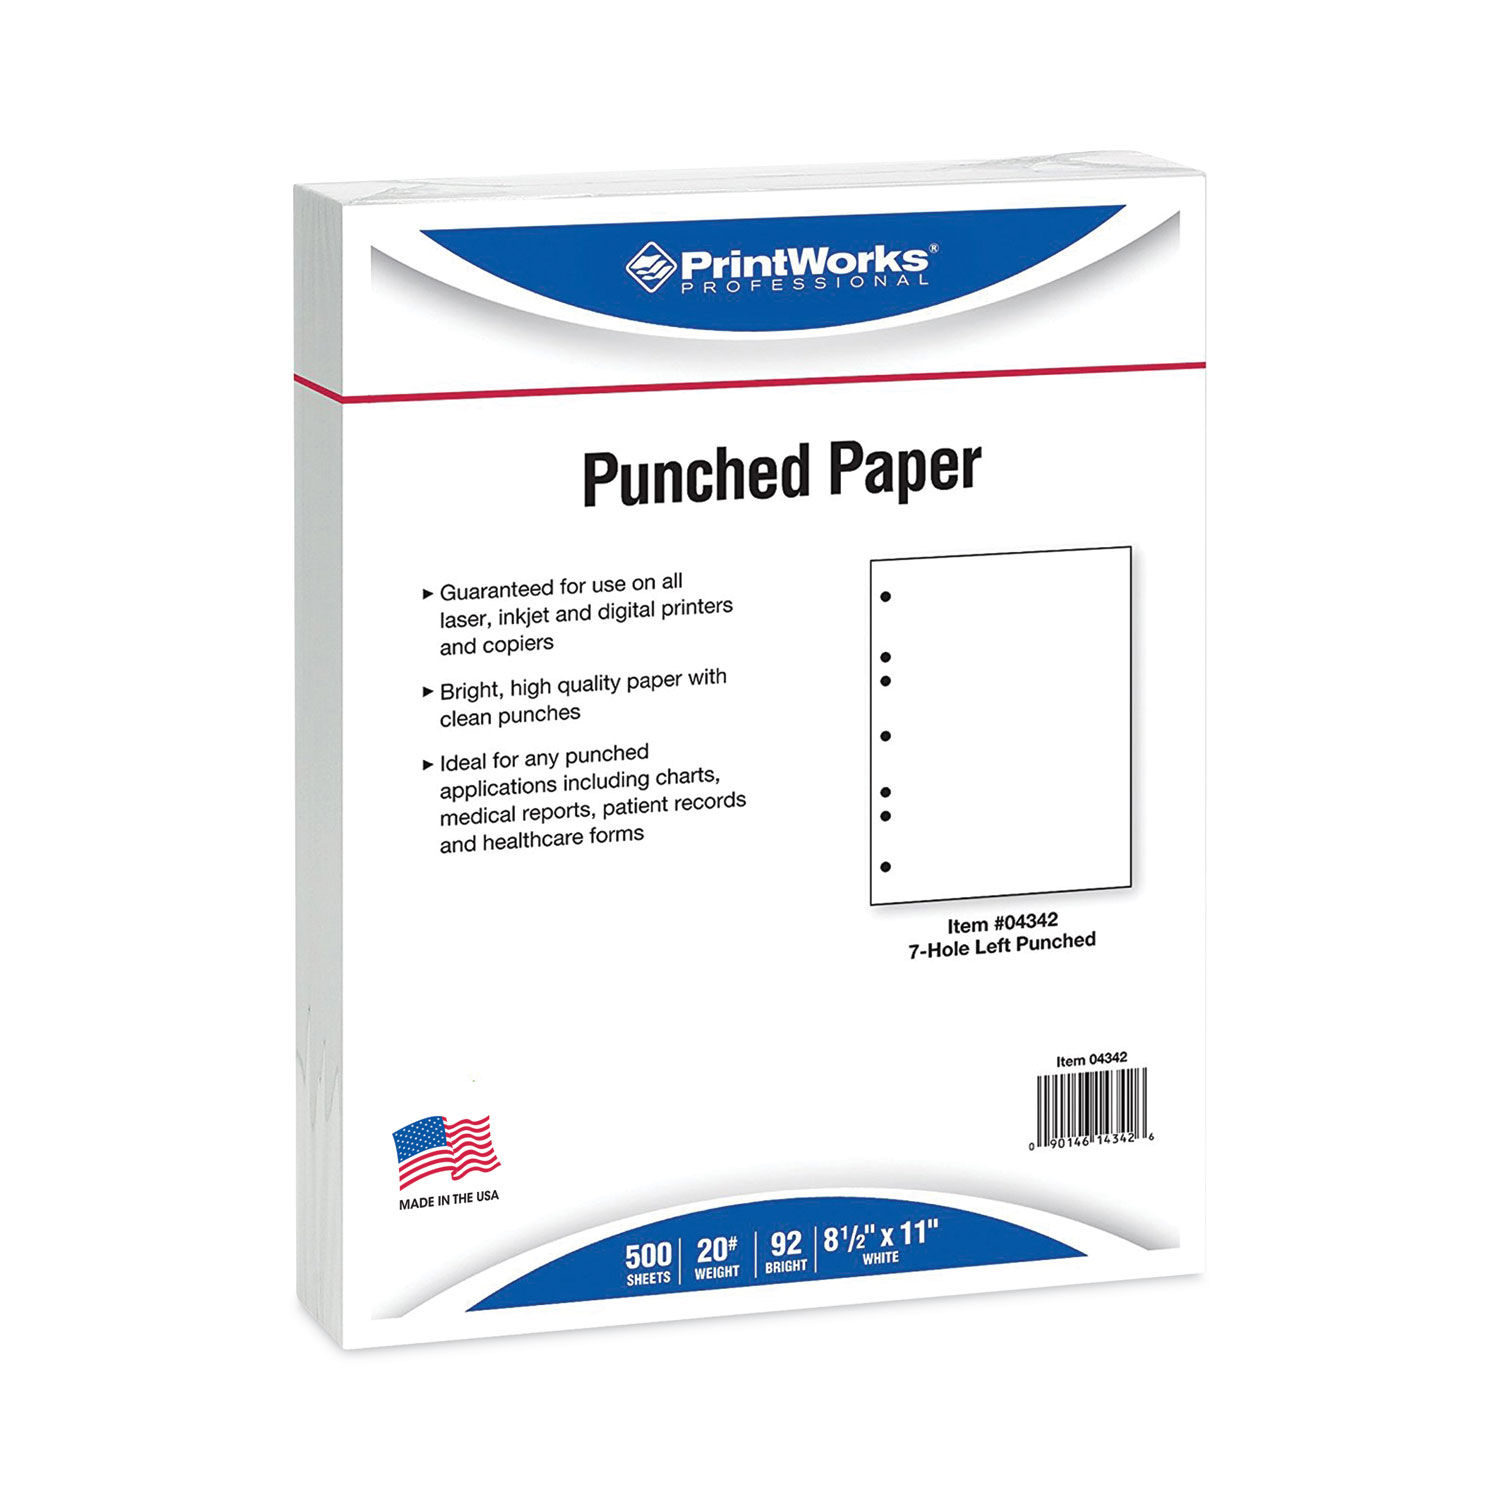 Perforated Paper, 4 1/4 from Left, Vertical on White 24#Letter Size Copy Paper (Ream of 500)